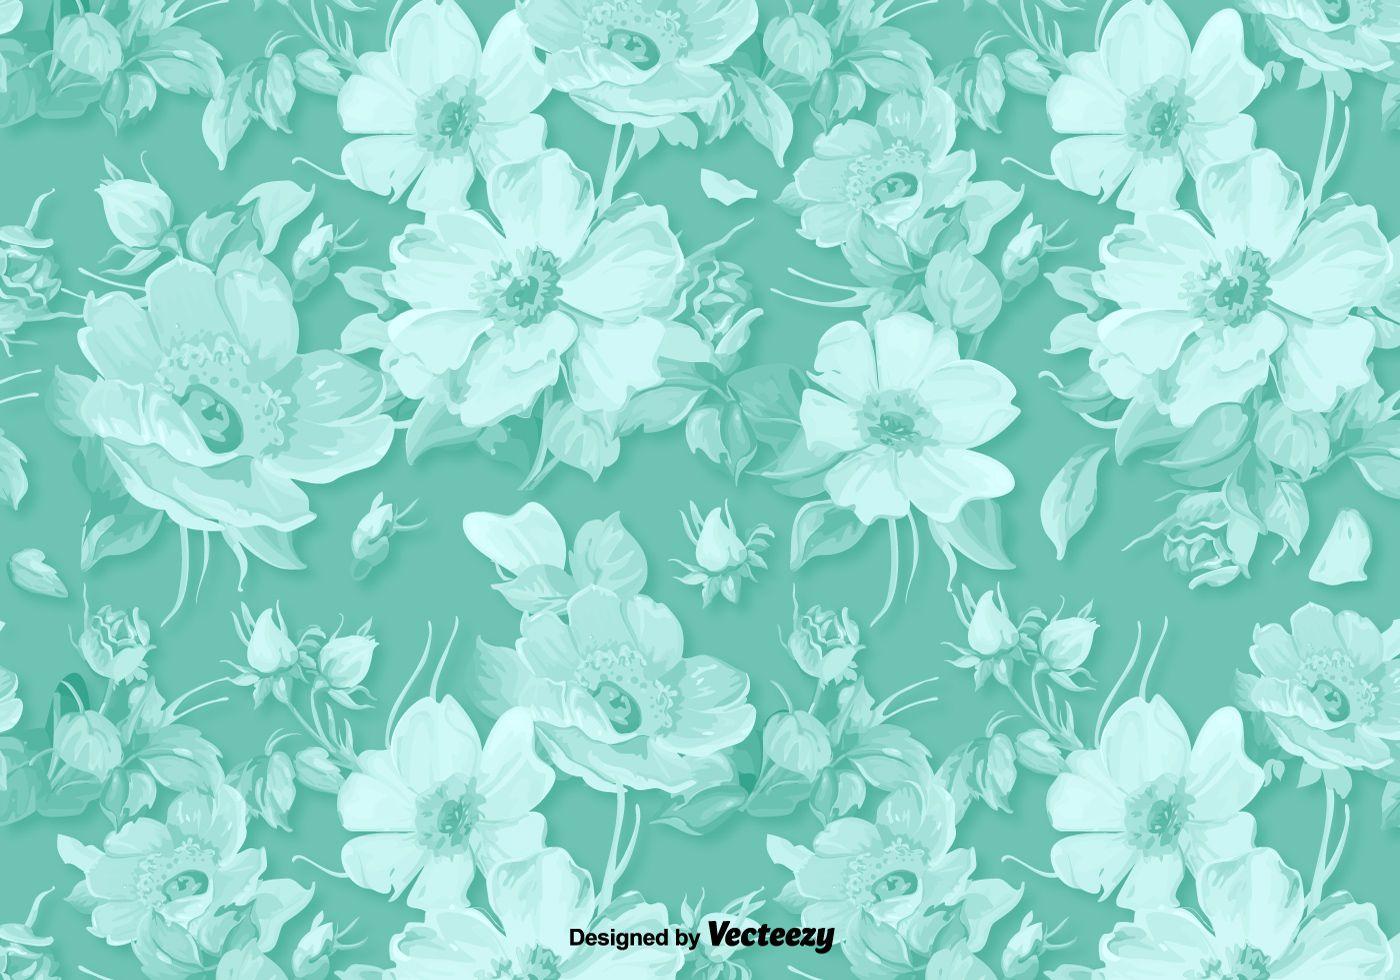 Classic Vector Floral Background Free Vector Art, Stock